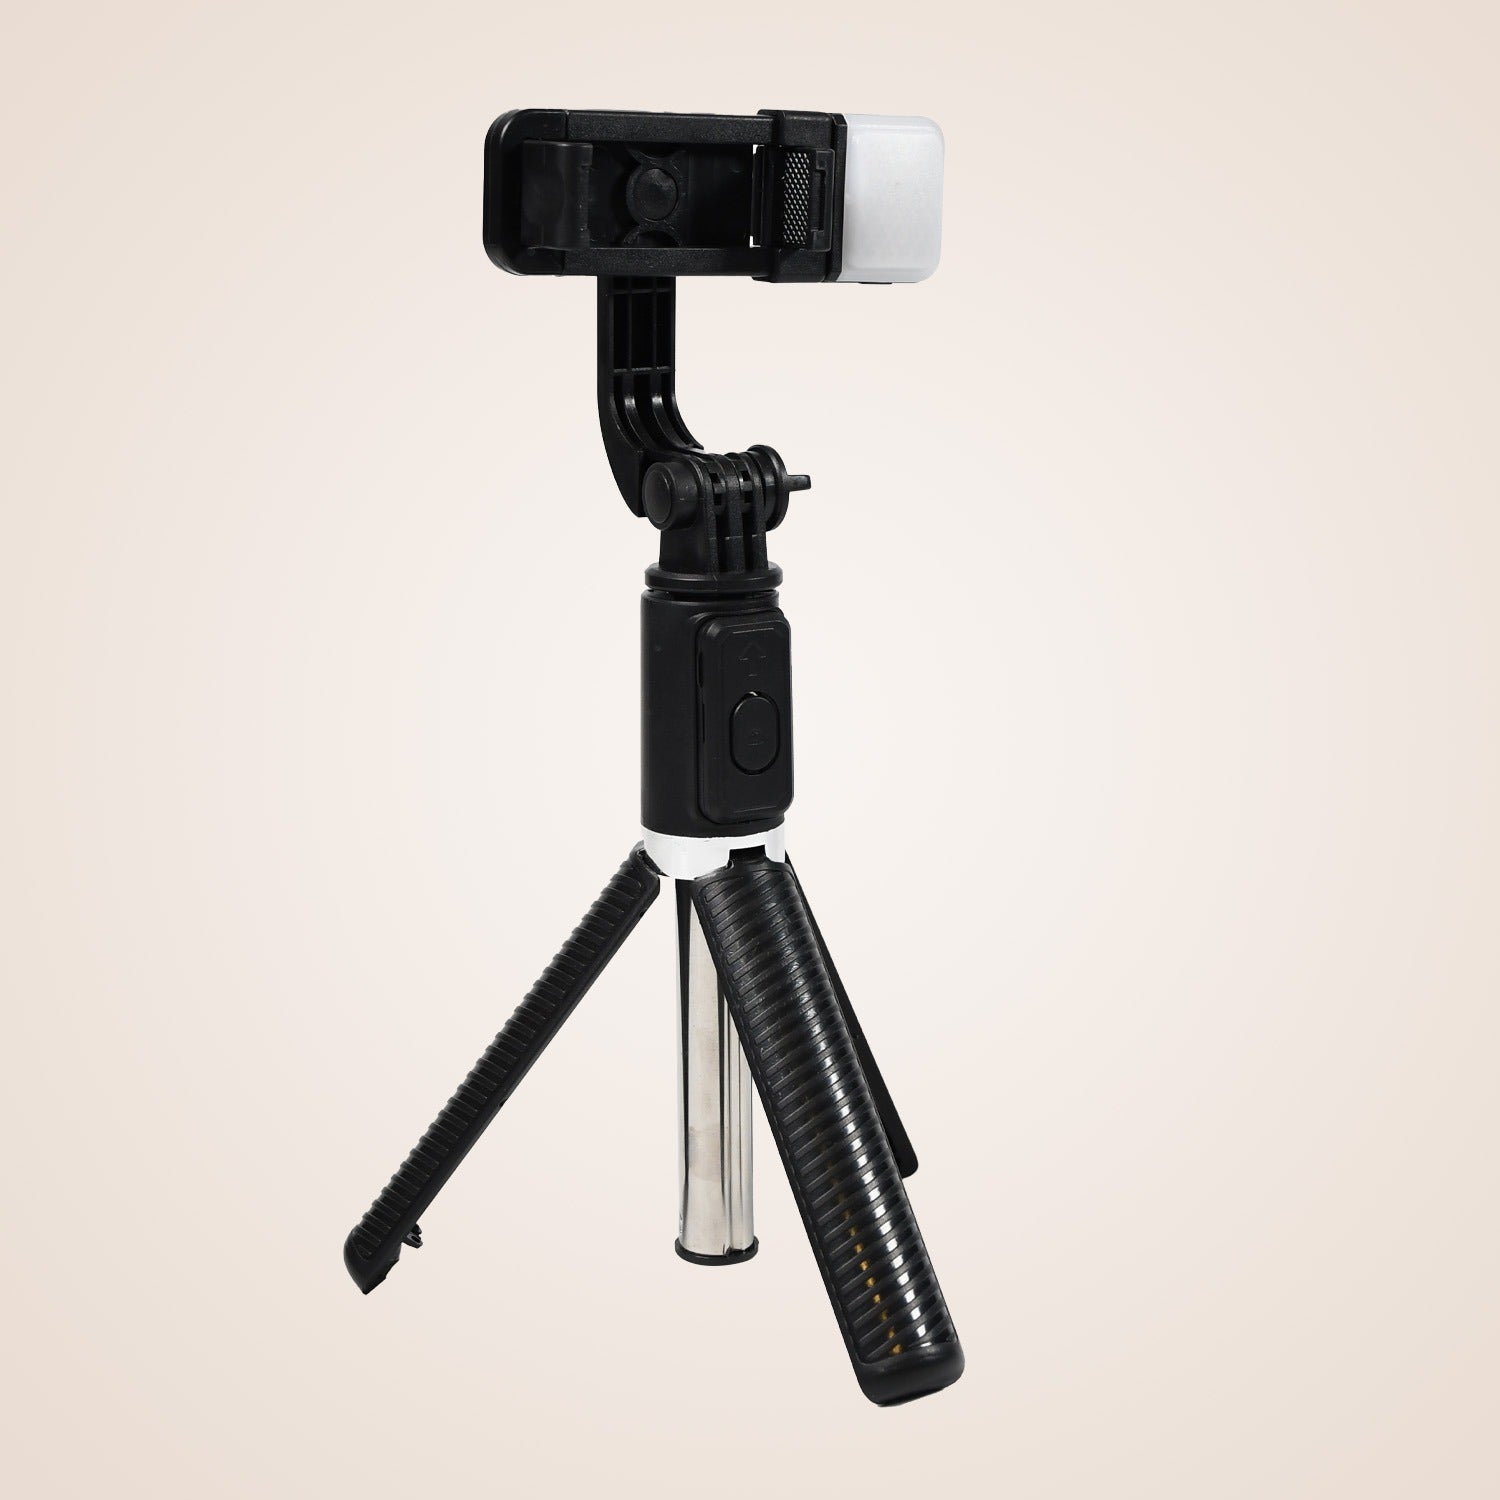 6400 Bluetooth Selfie Stick, Portable Phone Tripod Stand for Mobile. JK Trends